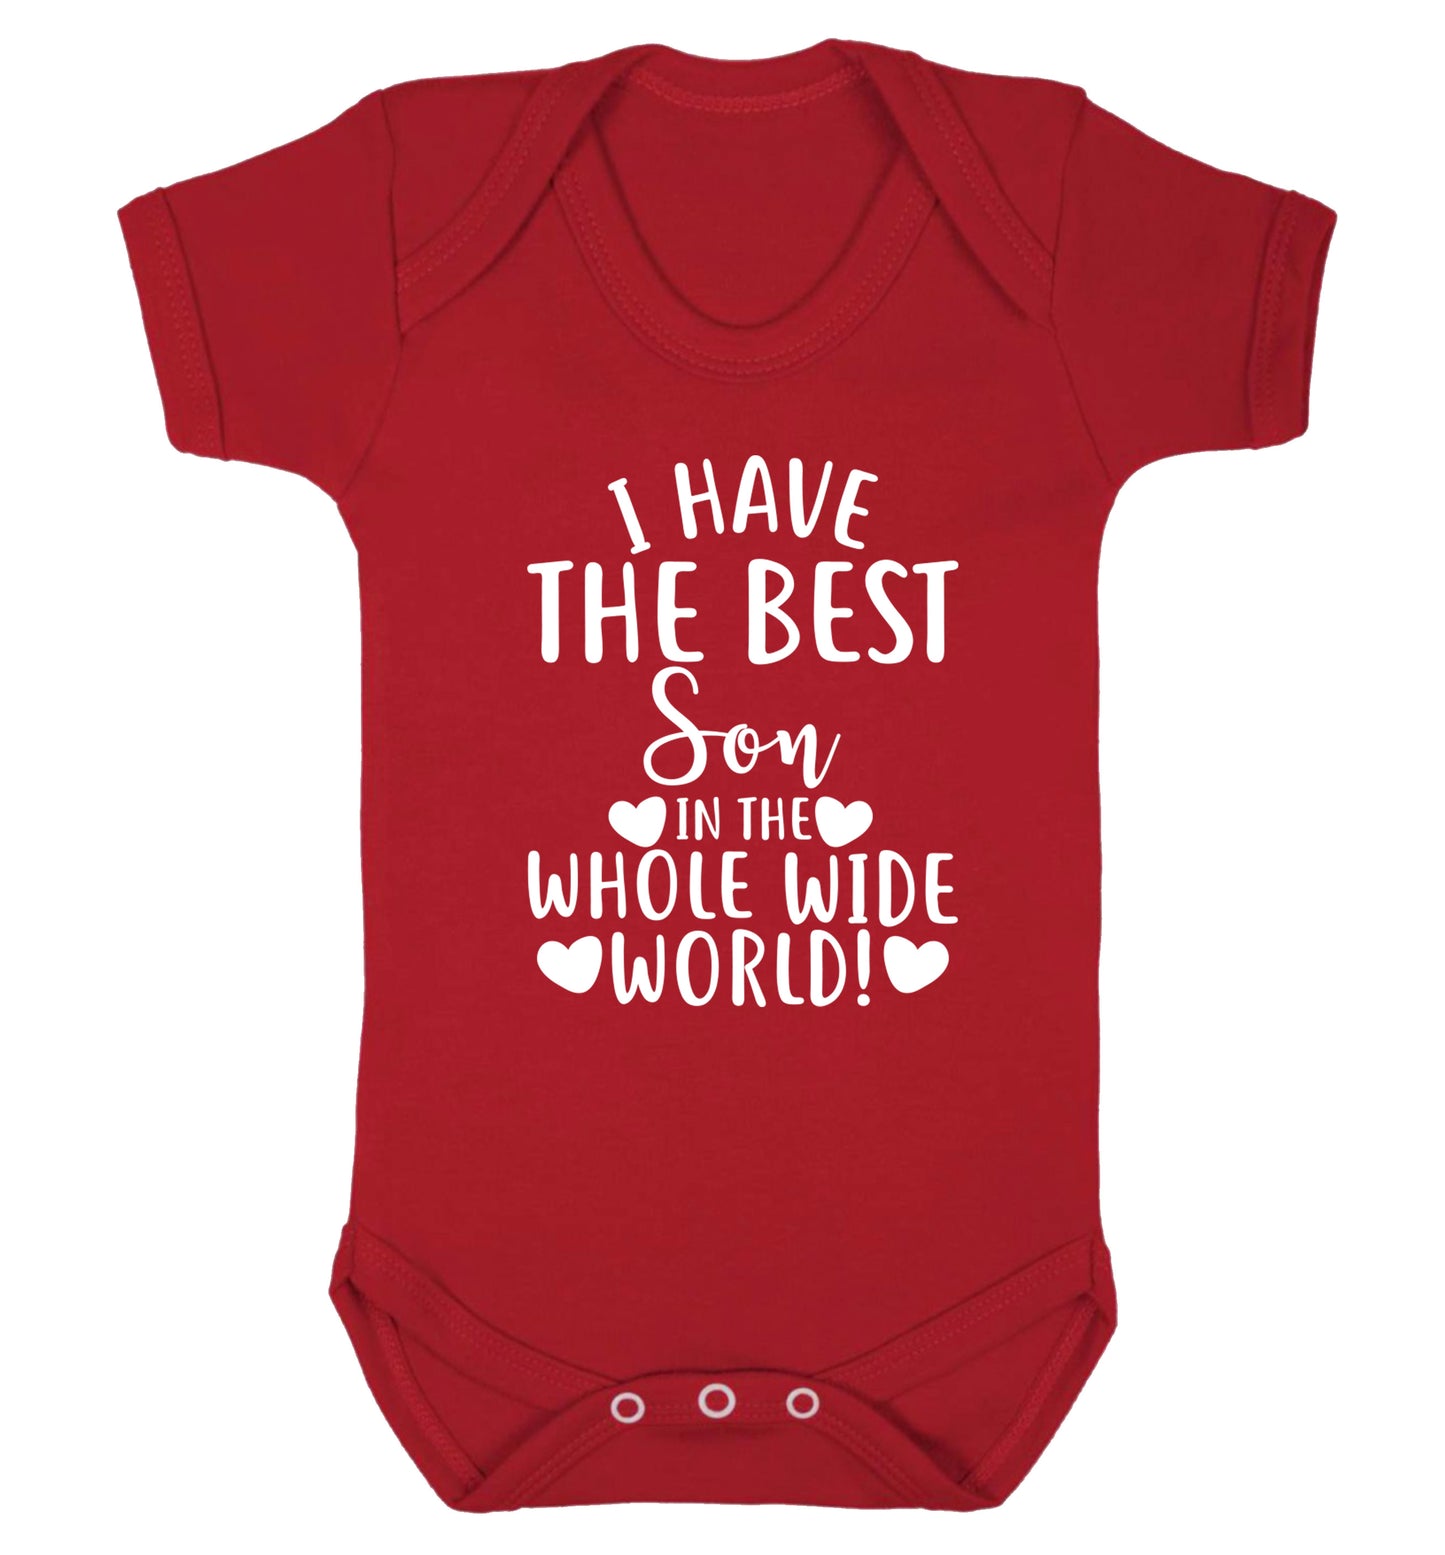 I have the best son in the whole wide world! Baby Vest red 18-24 months